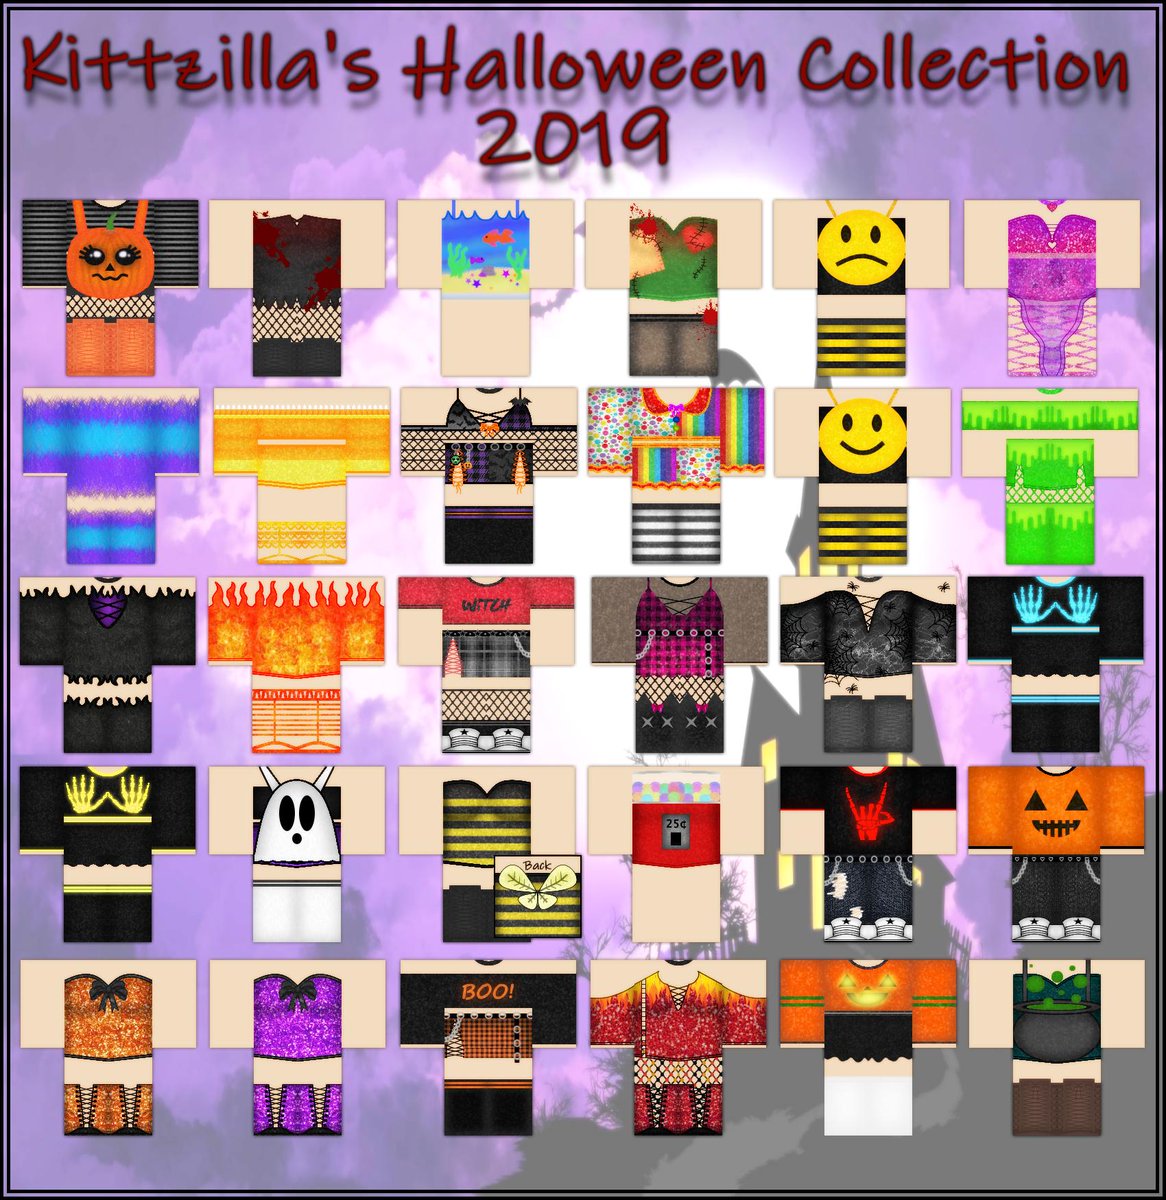 Kittzilla Heaven On Twitter My Halloween Collection Is Now Complete Been Working On These Designs Since August Hope You All Enjoy These Will Be Added To My Store Closer - roblox outfit template halloween